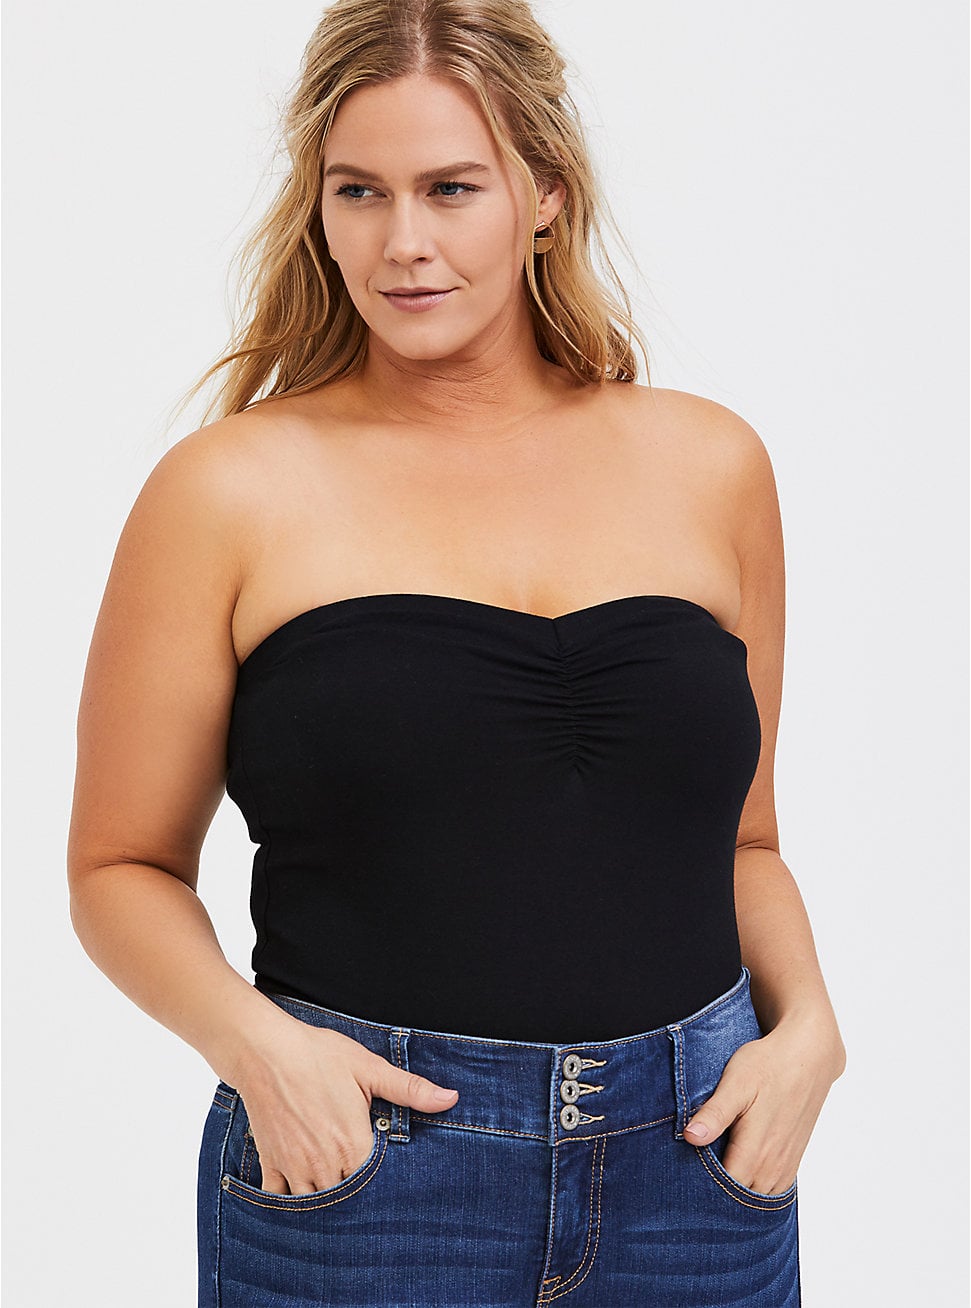 Torrid Black Ruched Foxy Tube Top, It's Time to Give Your Bodysuit a  Break, Because Tube Tops Are Huge For 2020